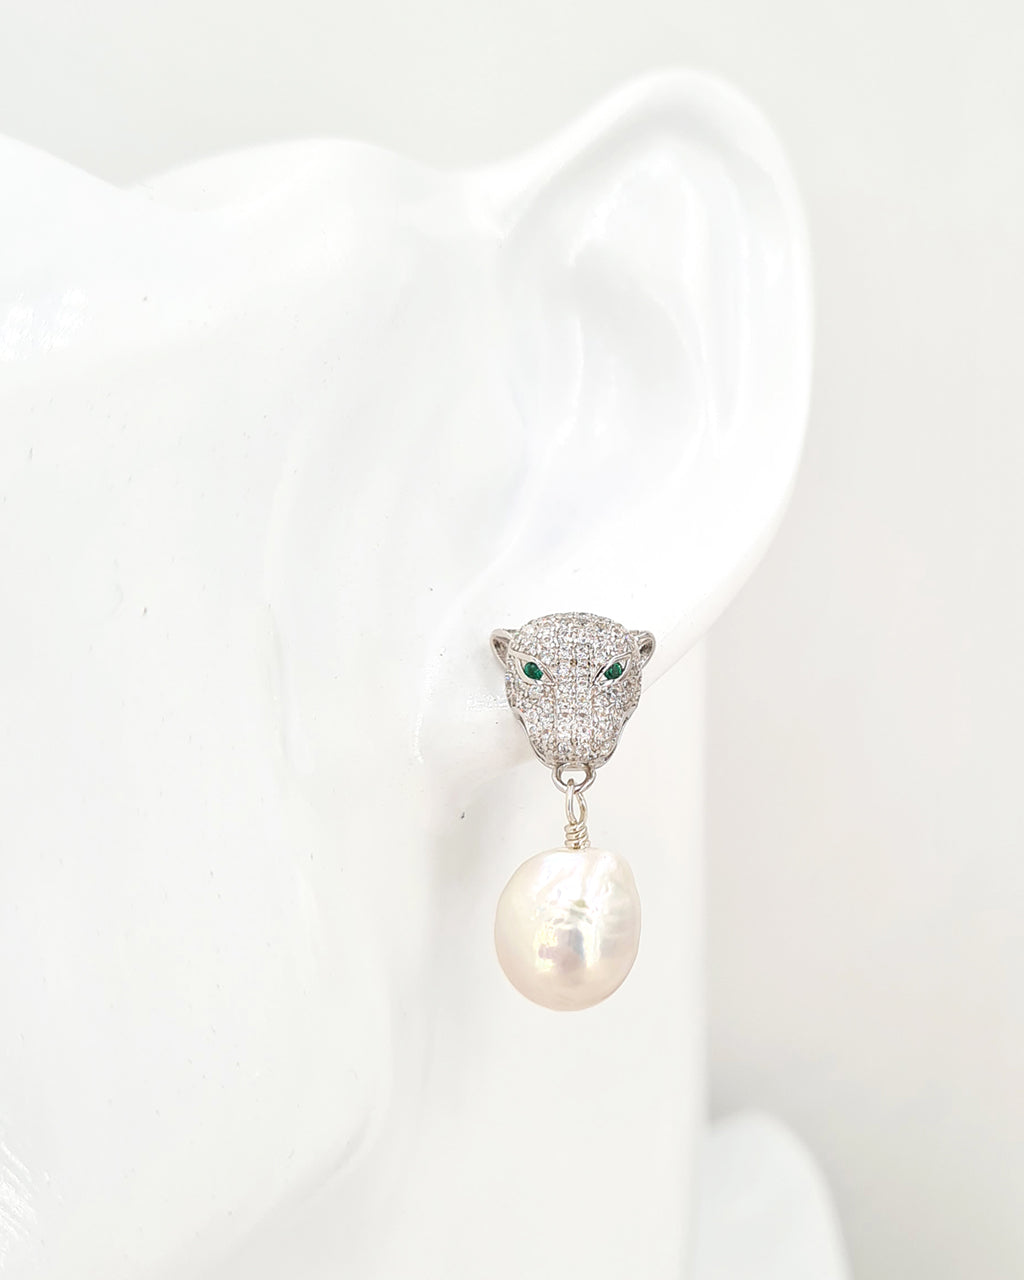 Green Eyed Panther Silver Earrings - Baroque Edison White Pearls - Wedding Bridal Jewelry for Brides and Bridesmaids | Singapore